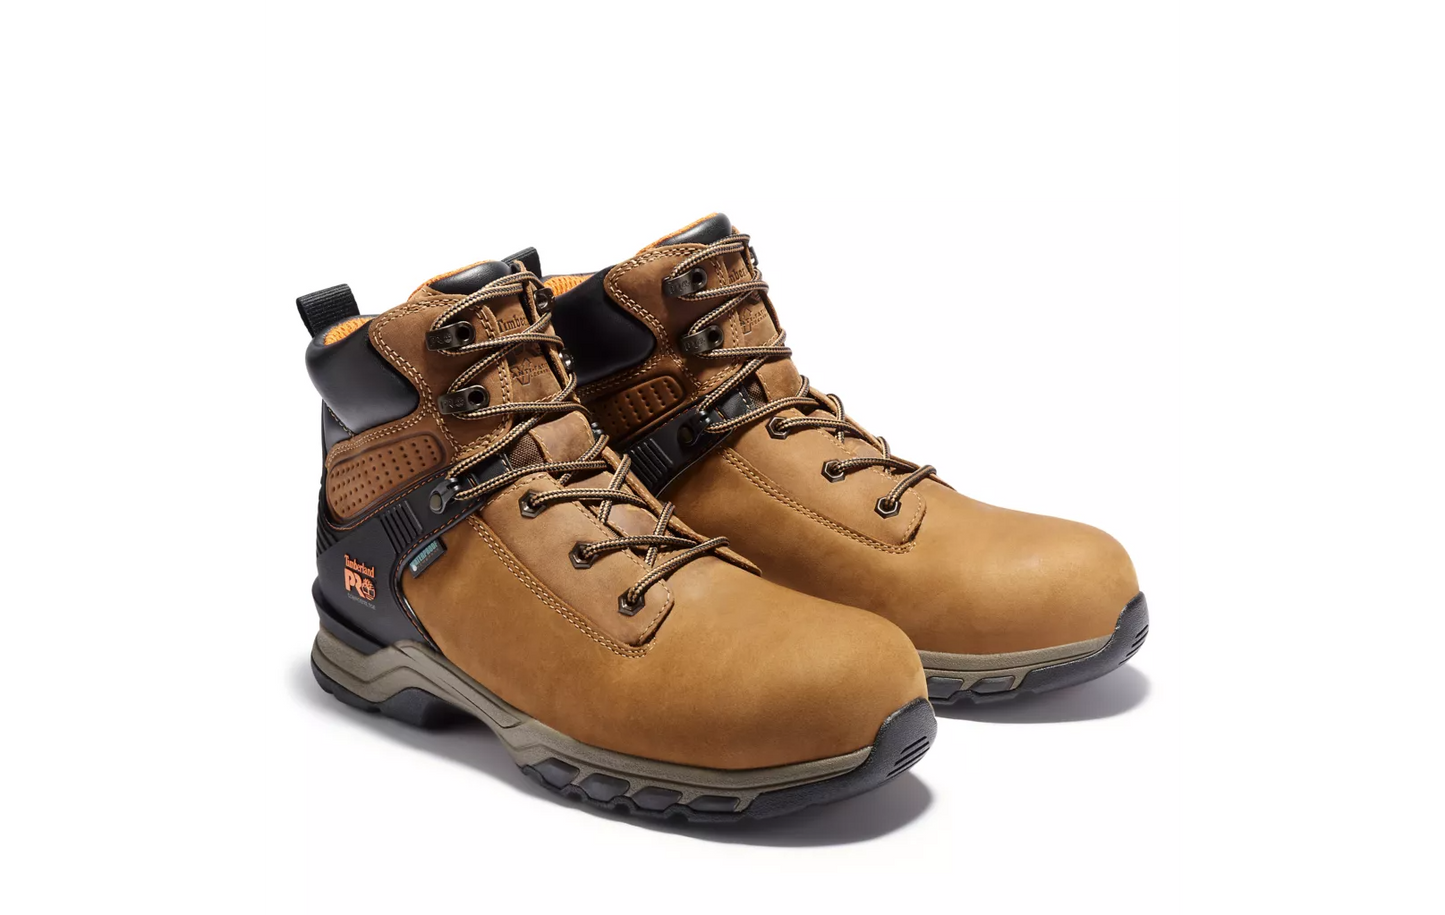 Timberland Pro Hypercharge 6" WP CT